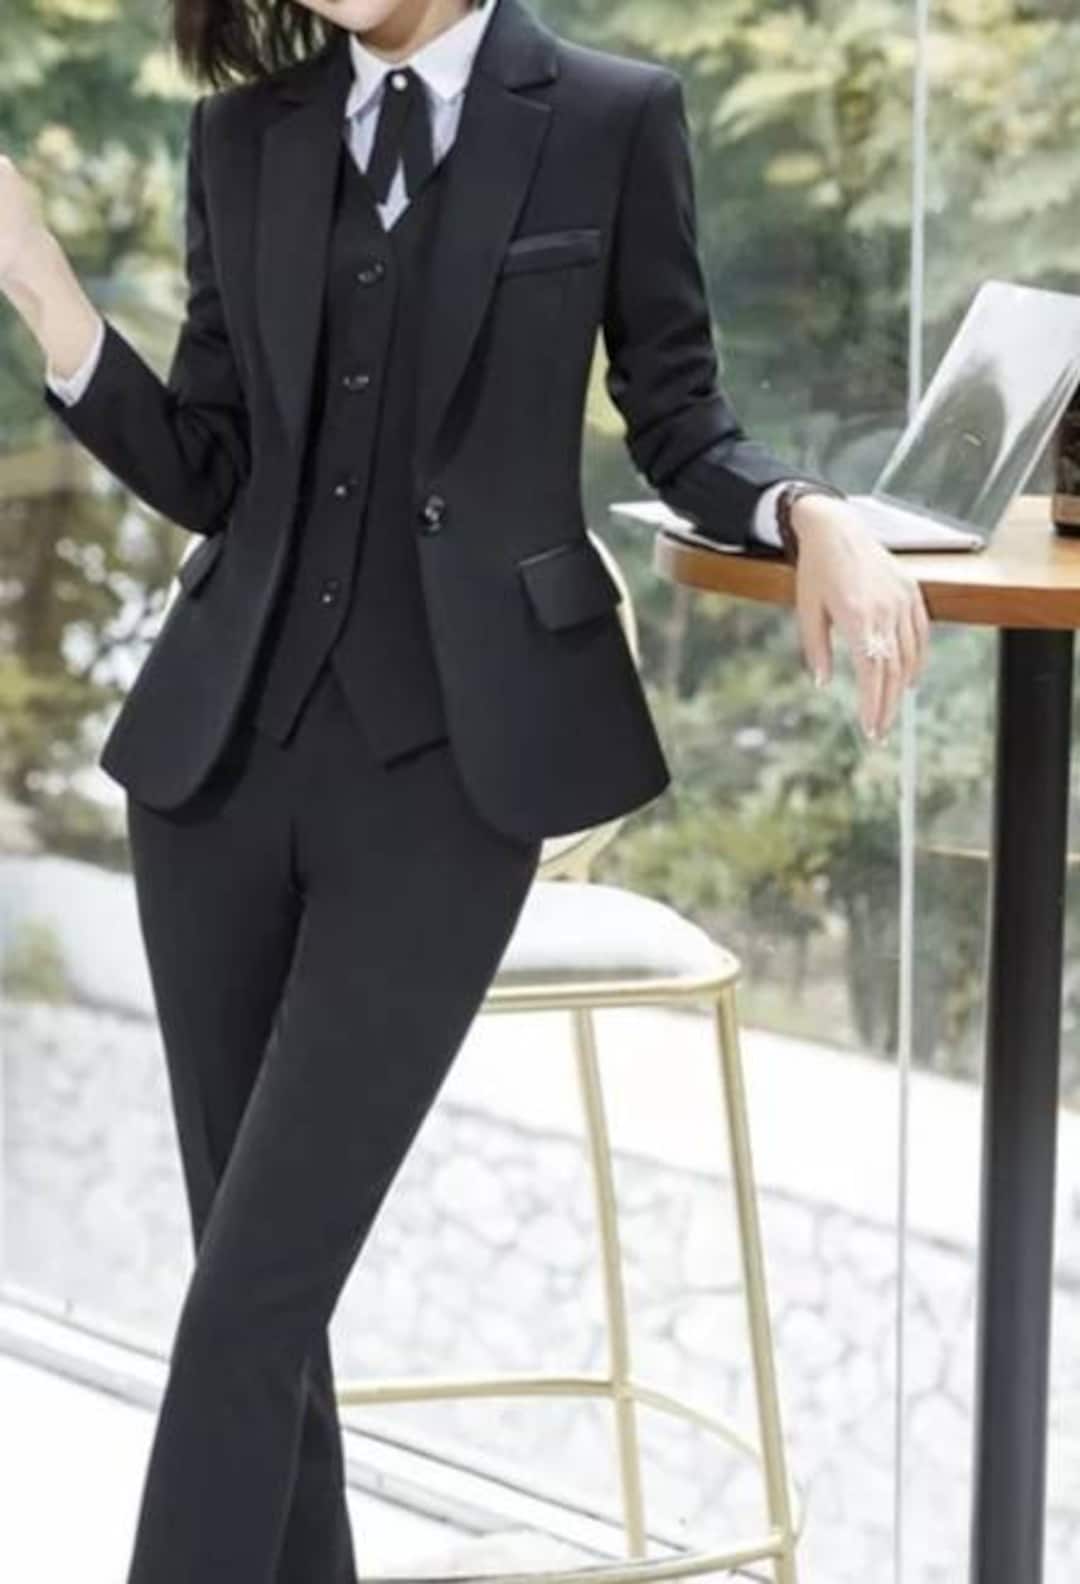 Work Suits Tall Women Women's Two Piece Lapels Suit Set Office Business  Long Sleeve Formal Jacket Pant Suit Slim Fit at Amazon Women's Clothing  store